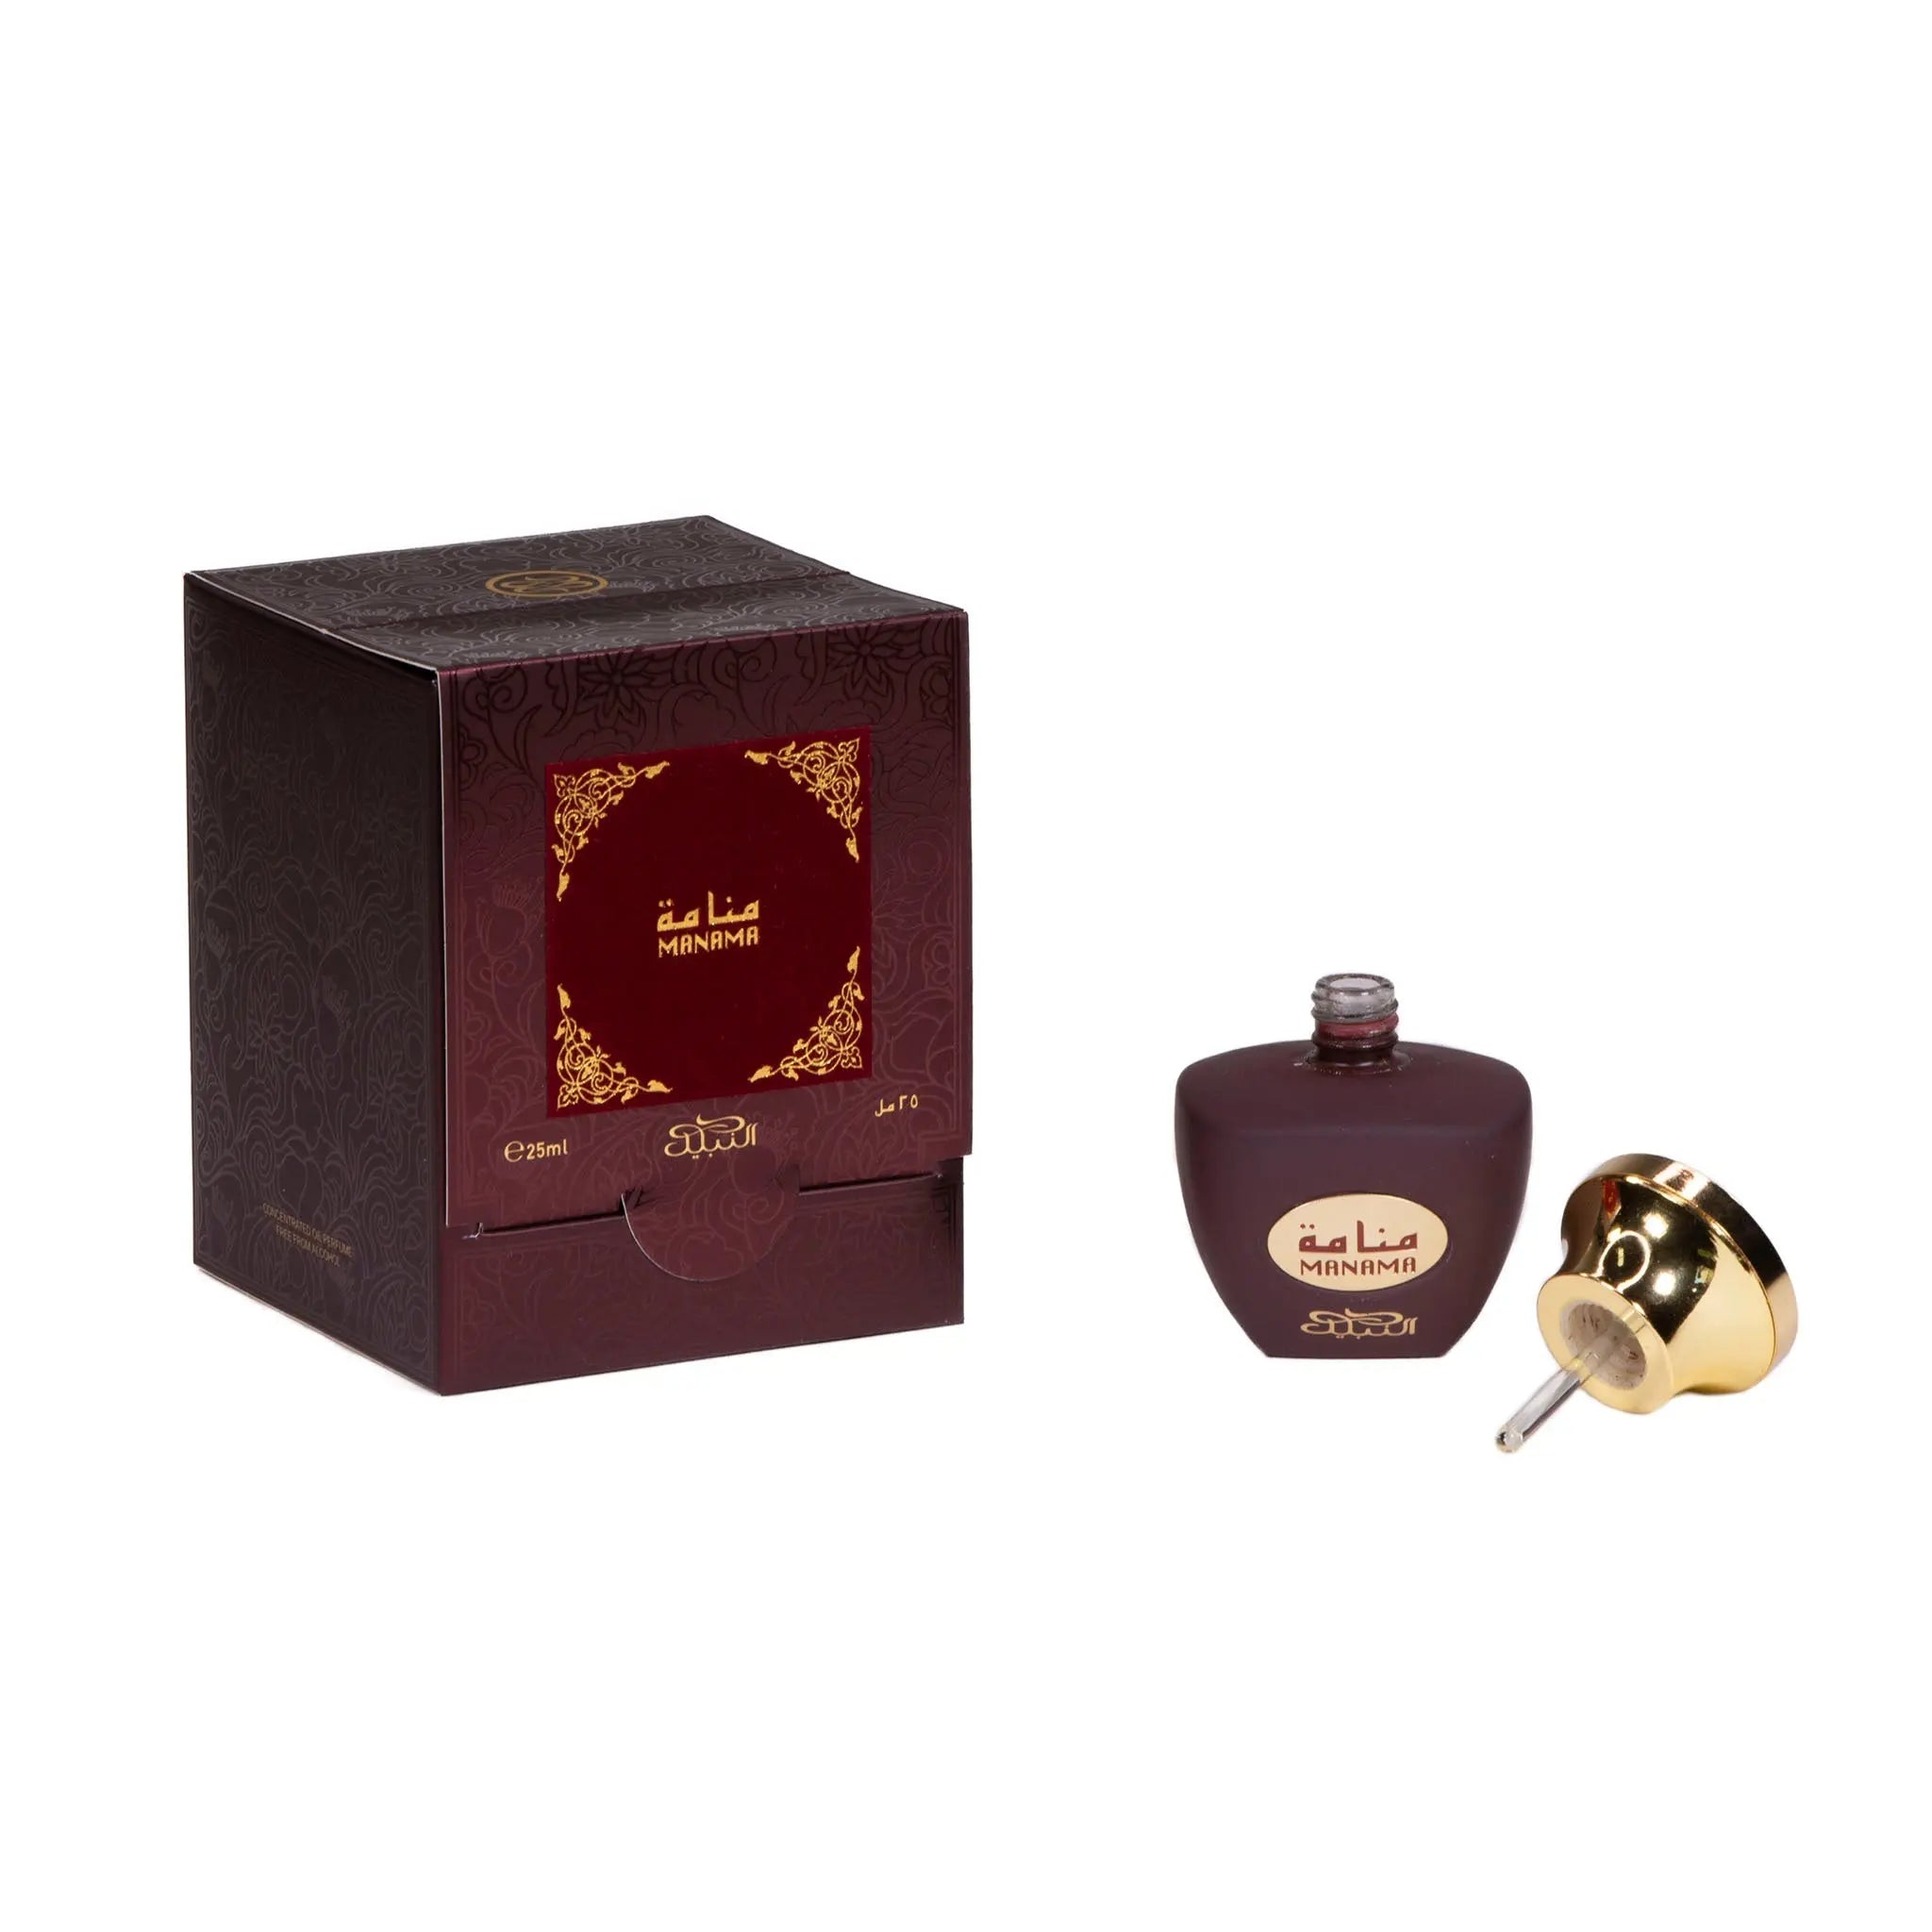 The image presents a dark brown perfume bottle with its cap removed, revealing a silver applicator rod. The bottle is labeled "MANAMA" in both Arabic and English script. The golden cap lies beside it. The bottle is part of a set with its packaging, a matching dark brown box that has a golden frame around a label with the same "MANAMA" branding, and ornate floral patterns embossed into the box. 